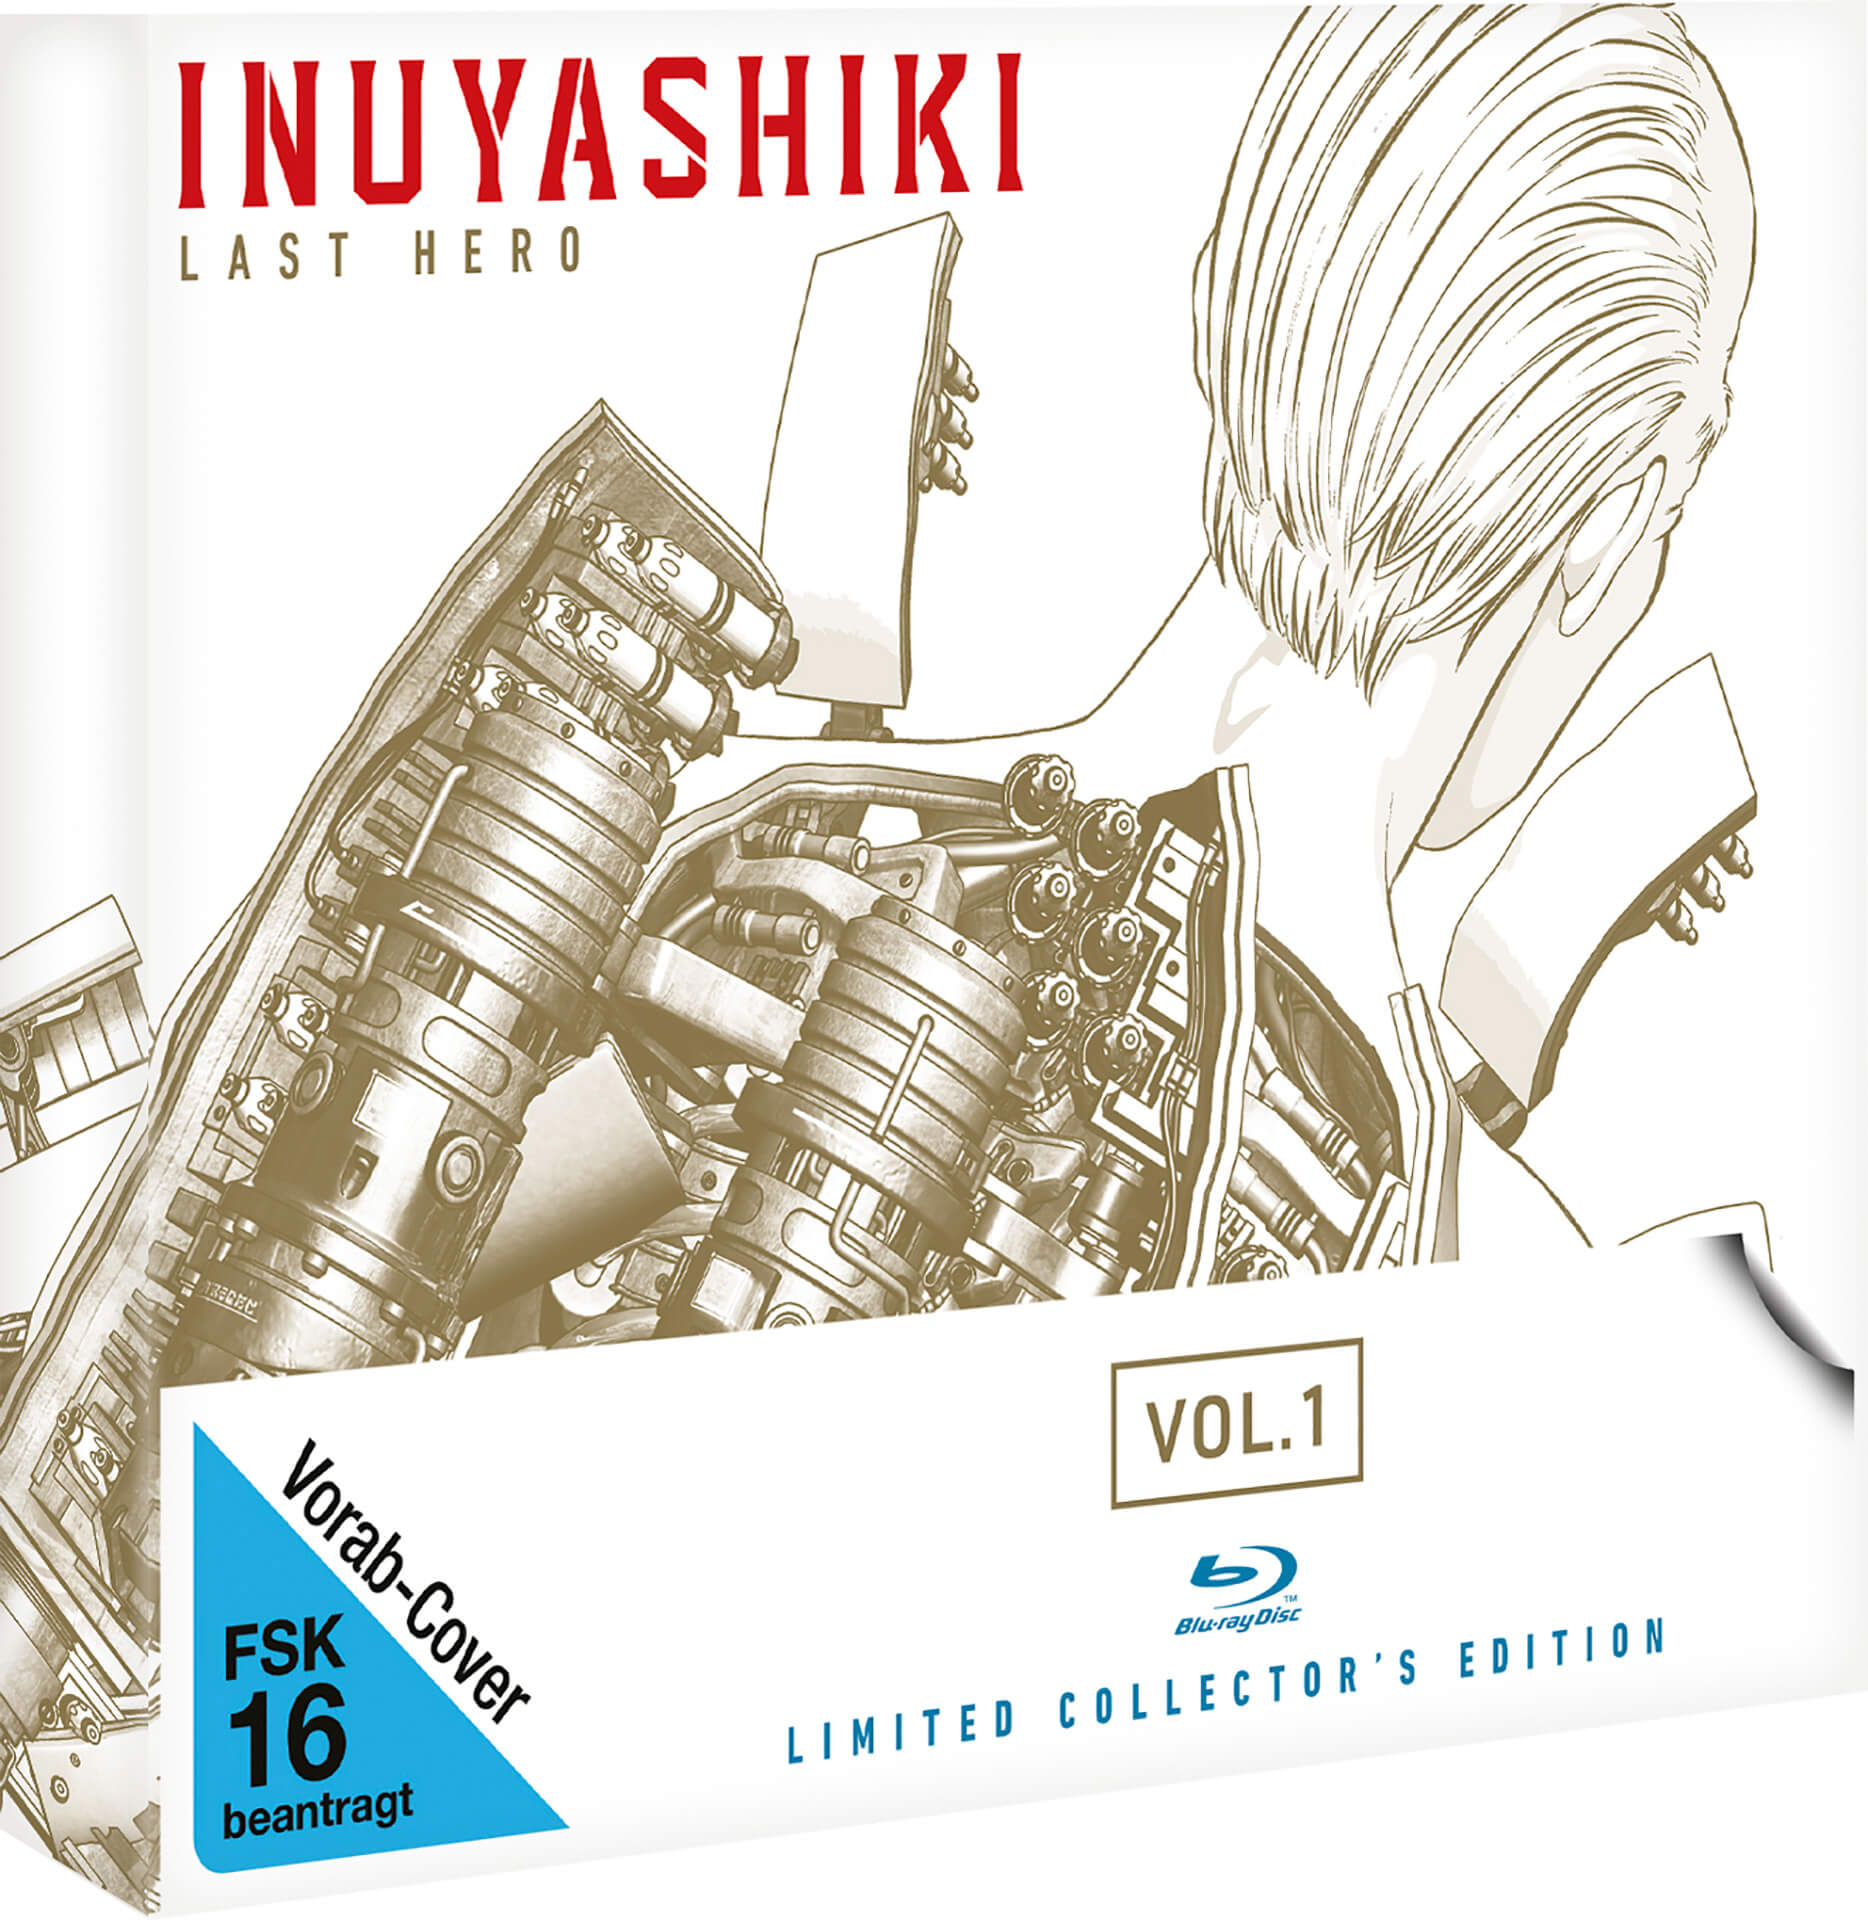 Inuyashiki Last Hero – Vol. 1 – Limited Collector’s Edition